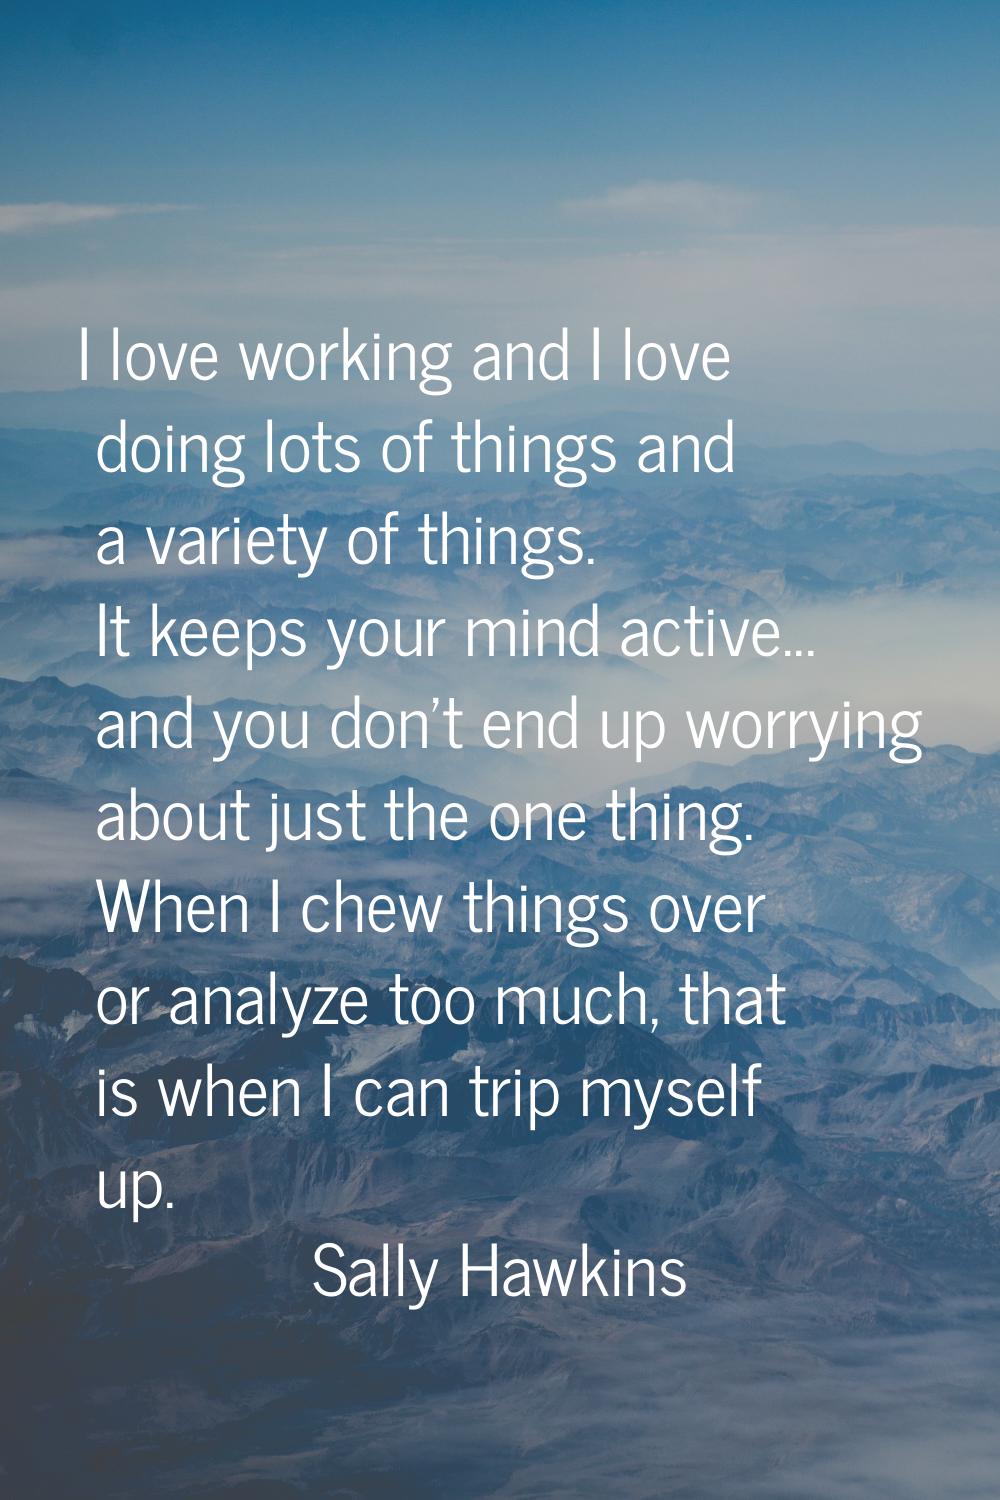 I love working and I love doing lots of things and a variety of things. It keeps your mind active..